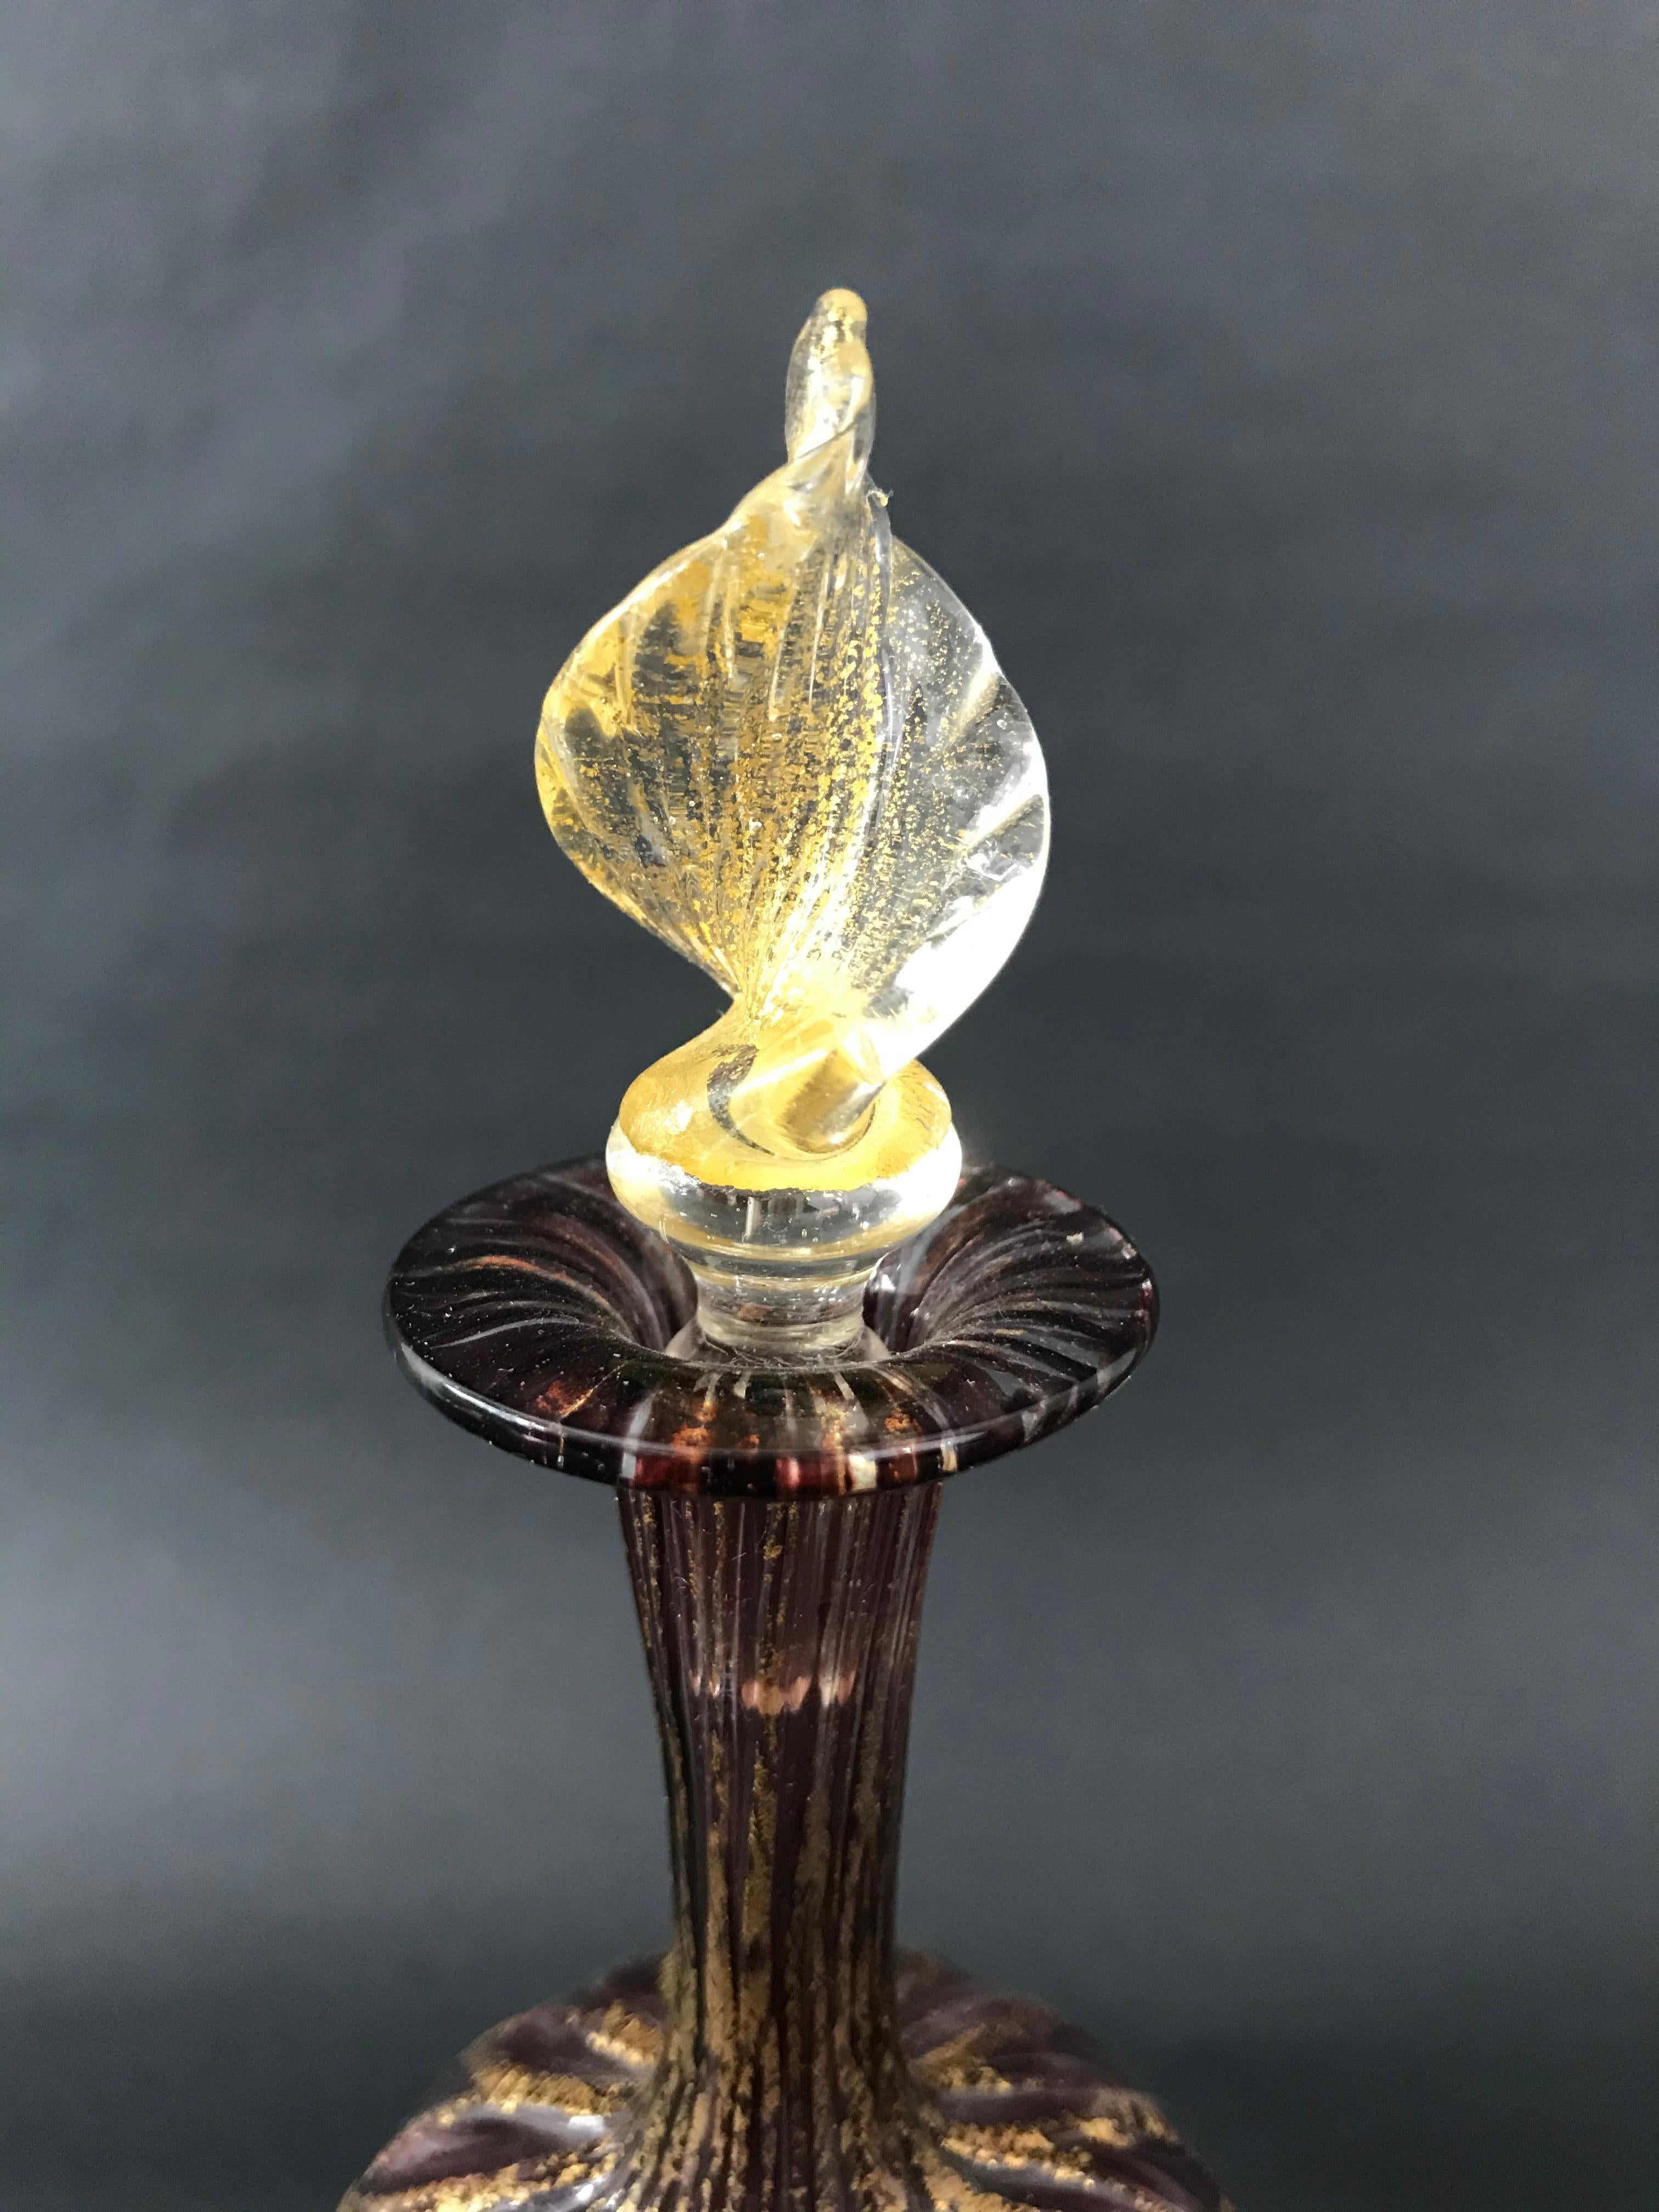 Charming perfume bottle in mauve and gold Murano glass. The neck of the bottle is fluted, the body has a diamond pattern formed by gold inclusions, the stopper forming a spiral leaf also contains gold inclusions.
Italian work of Murano,
end of